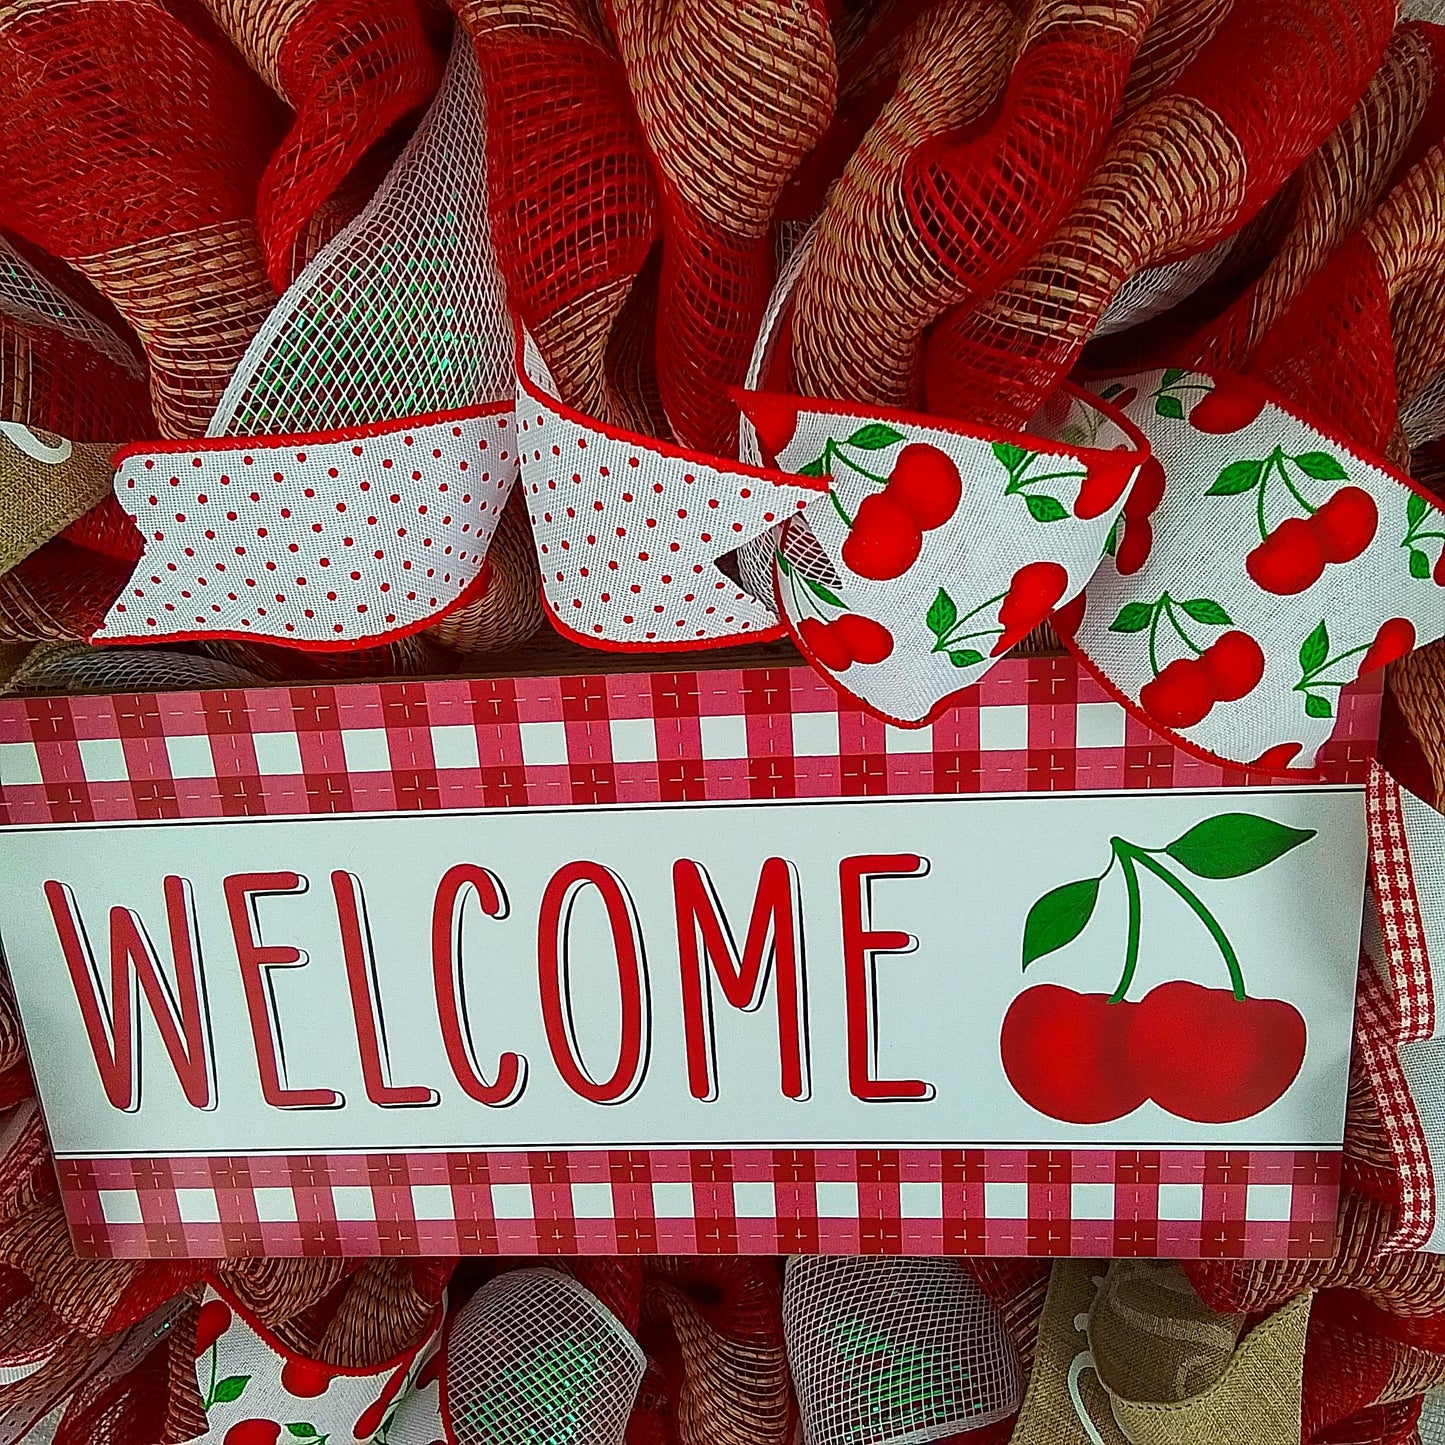 Cherry Summer Wreath - Fruit Welcome Red Spring Decor - Front Porch Decorations - Pink Door Wreaths